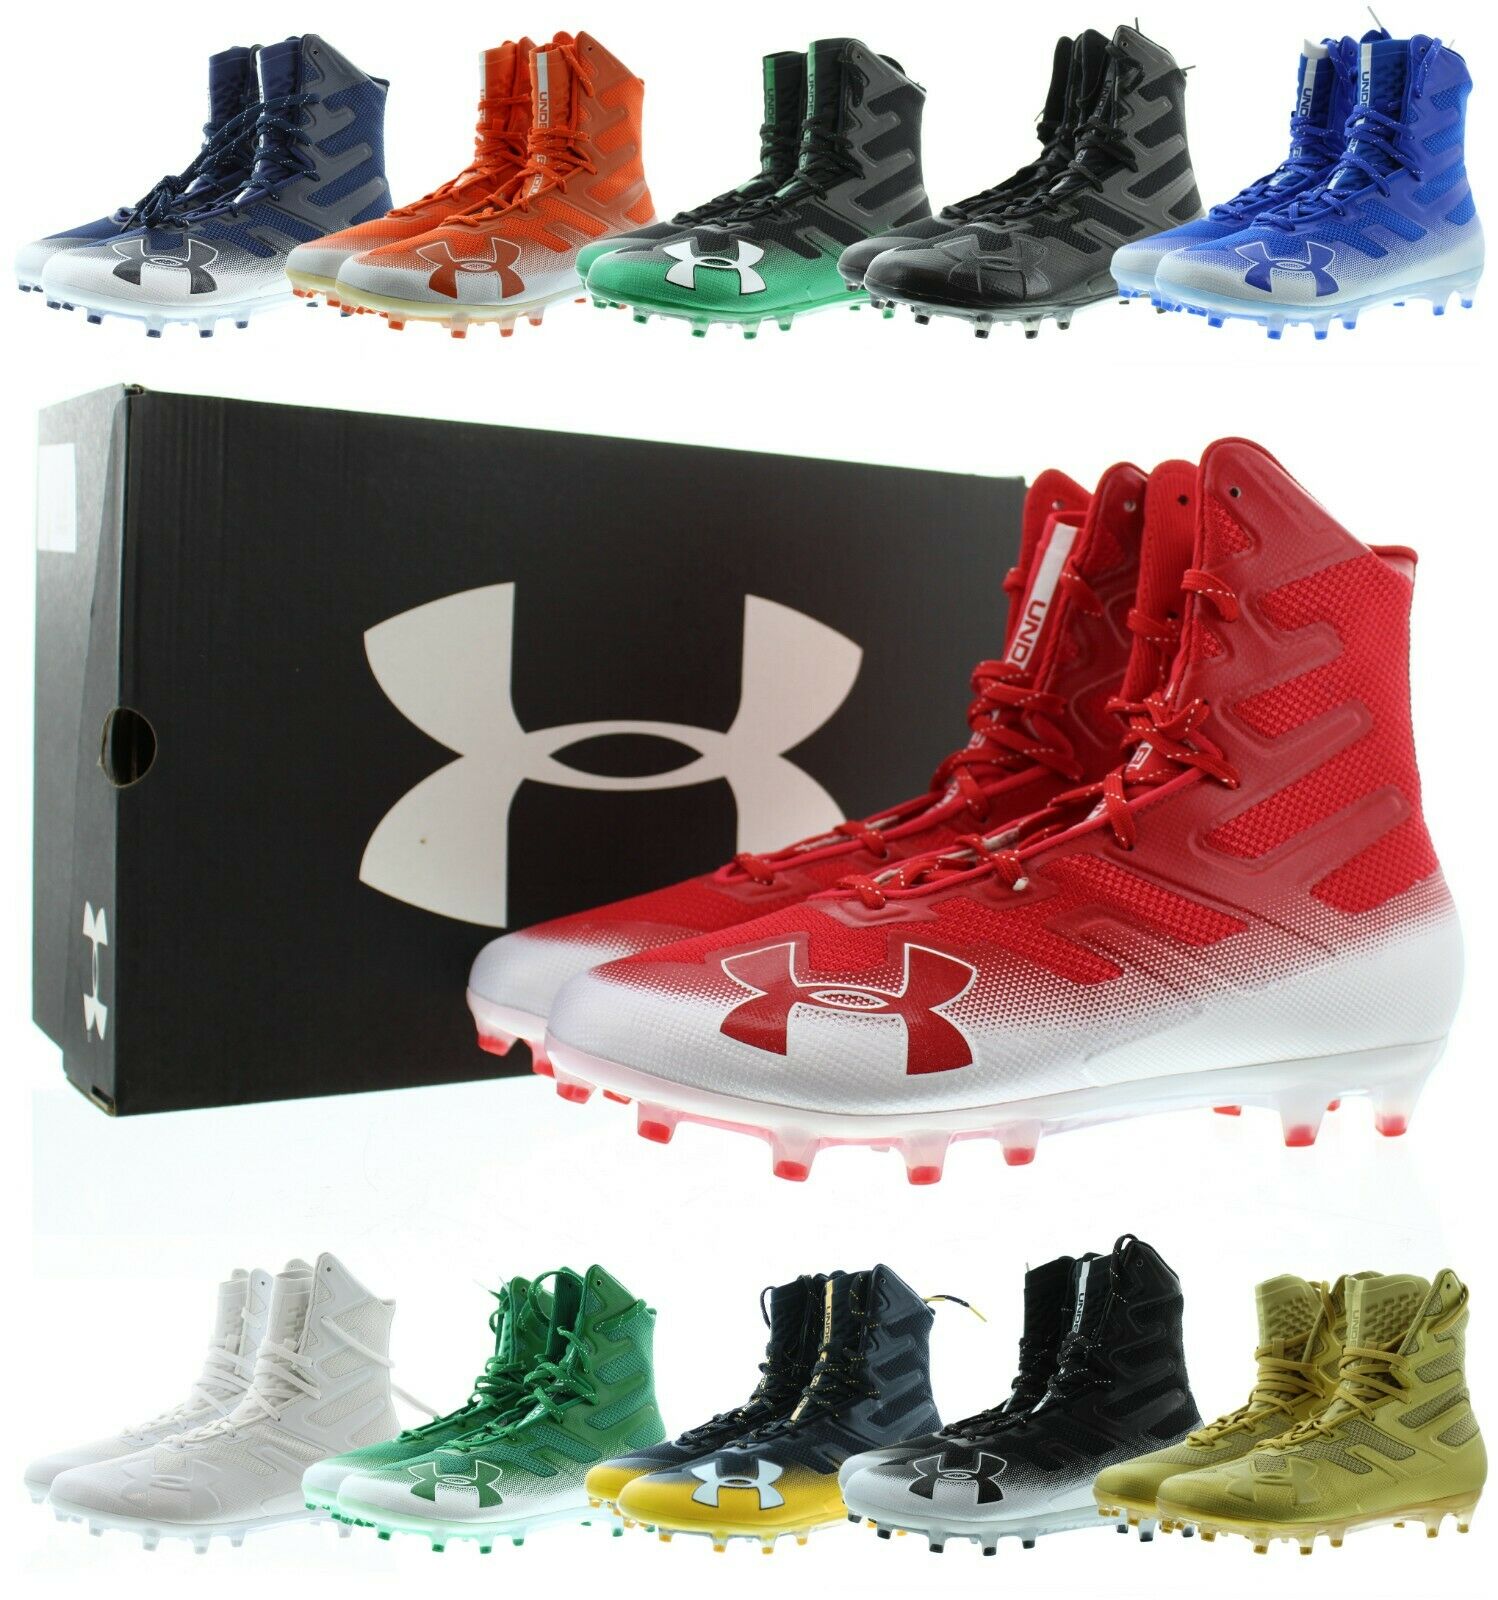 Under Armour Football Cleats Highlight Mc Men's Athletic Cleat, 3000177